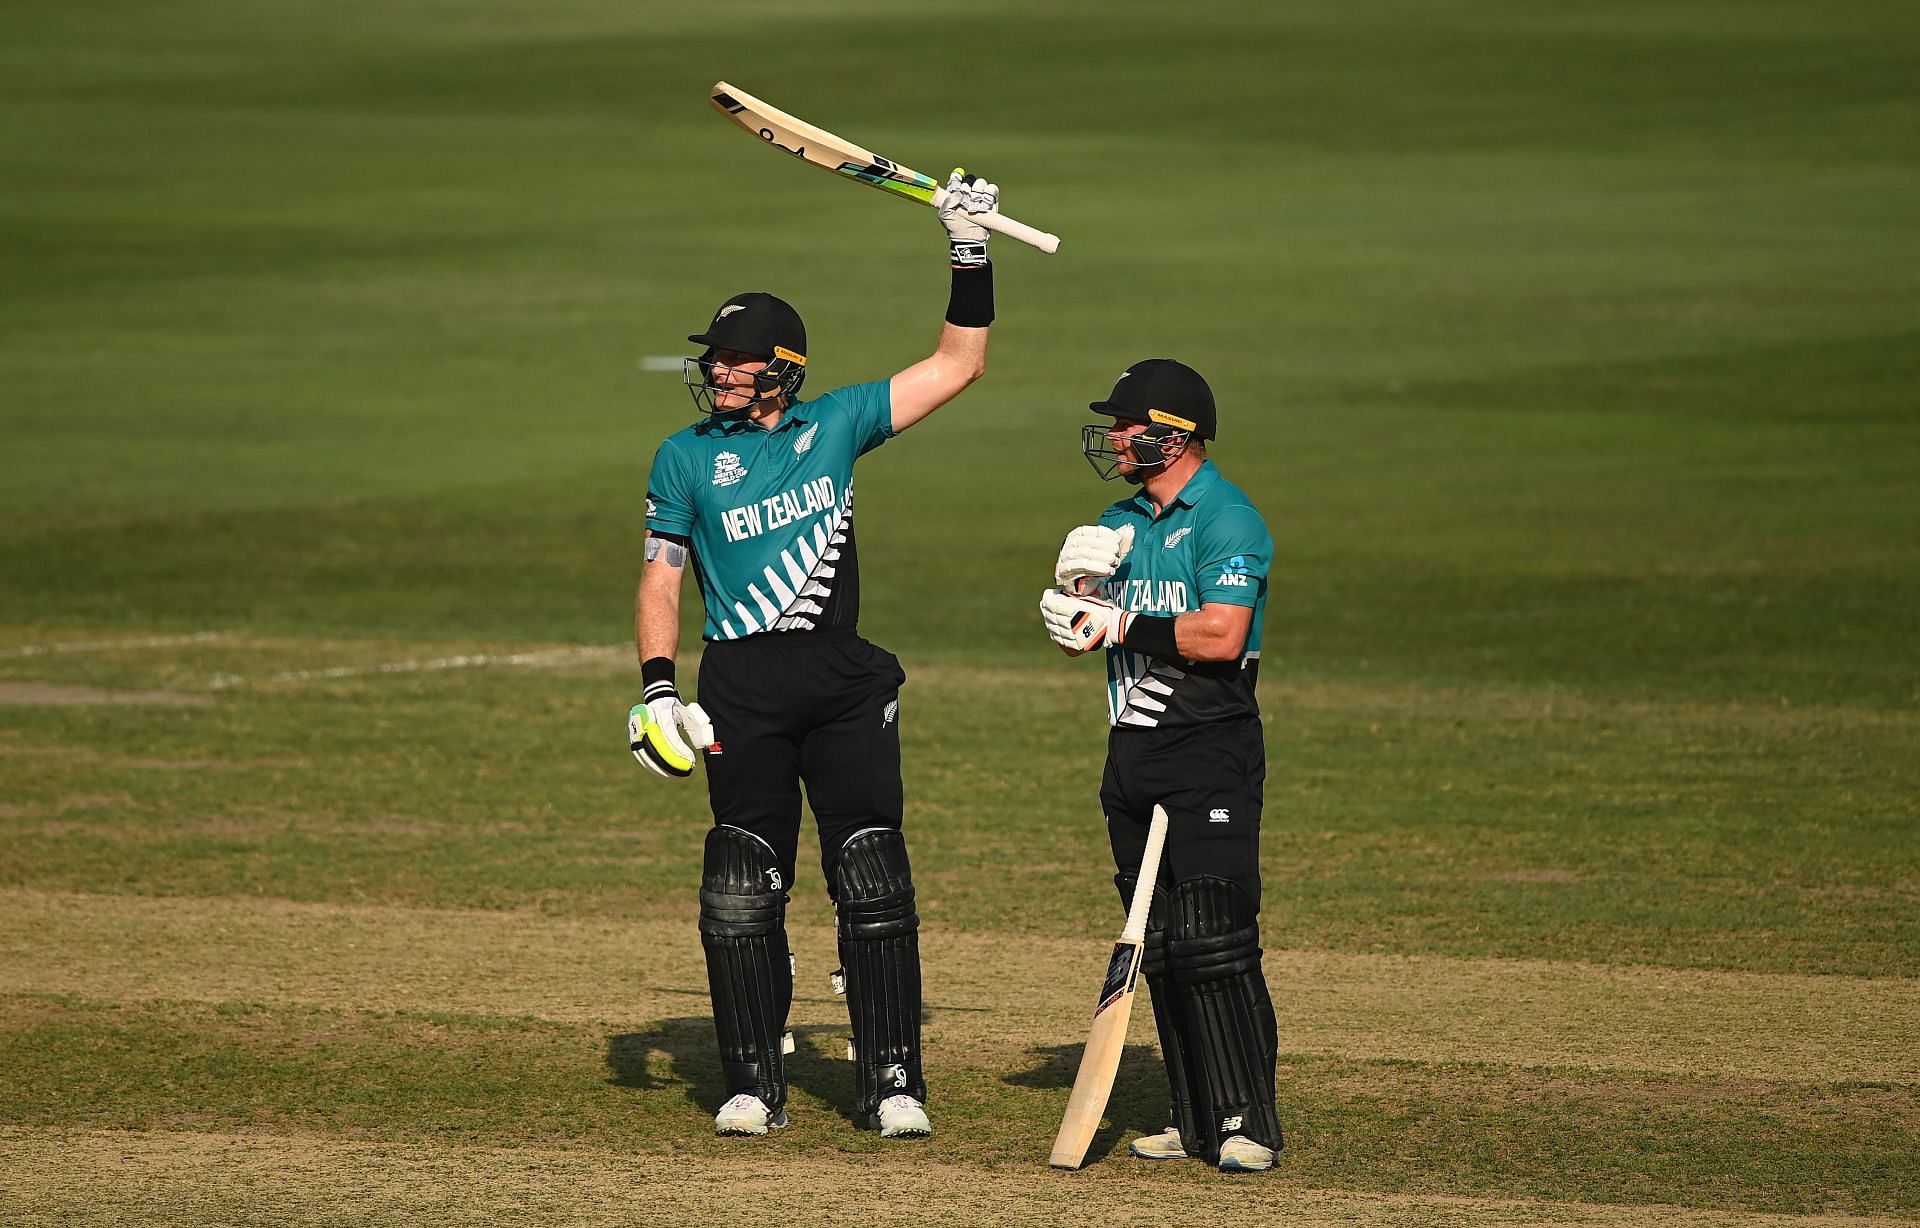 Can New Zealand continue their winning momentum in ICC T20 World Cup 2021?